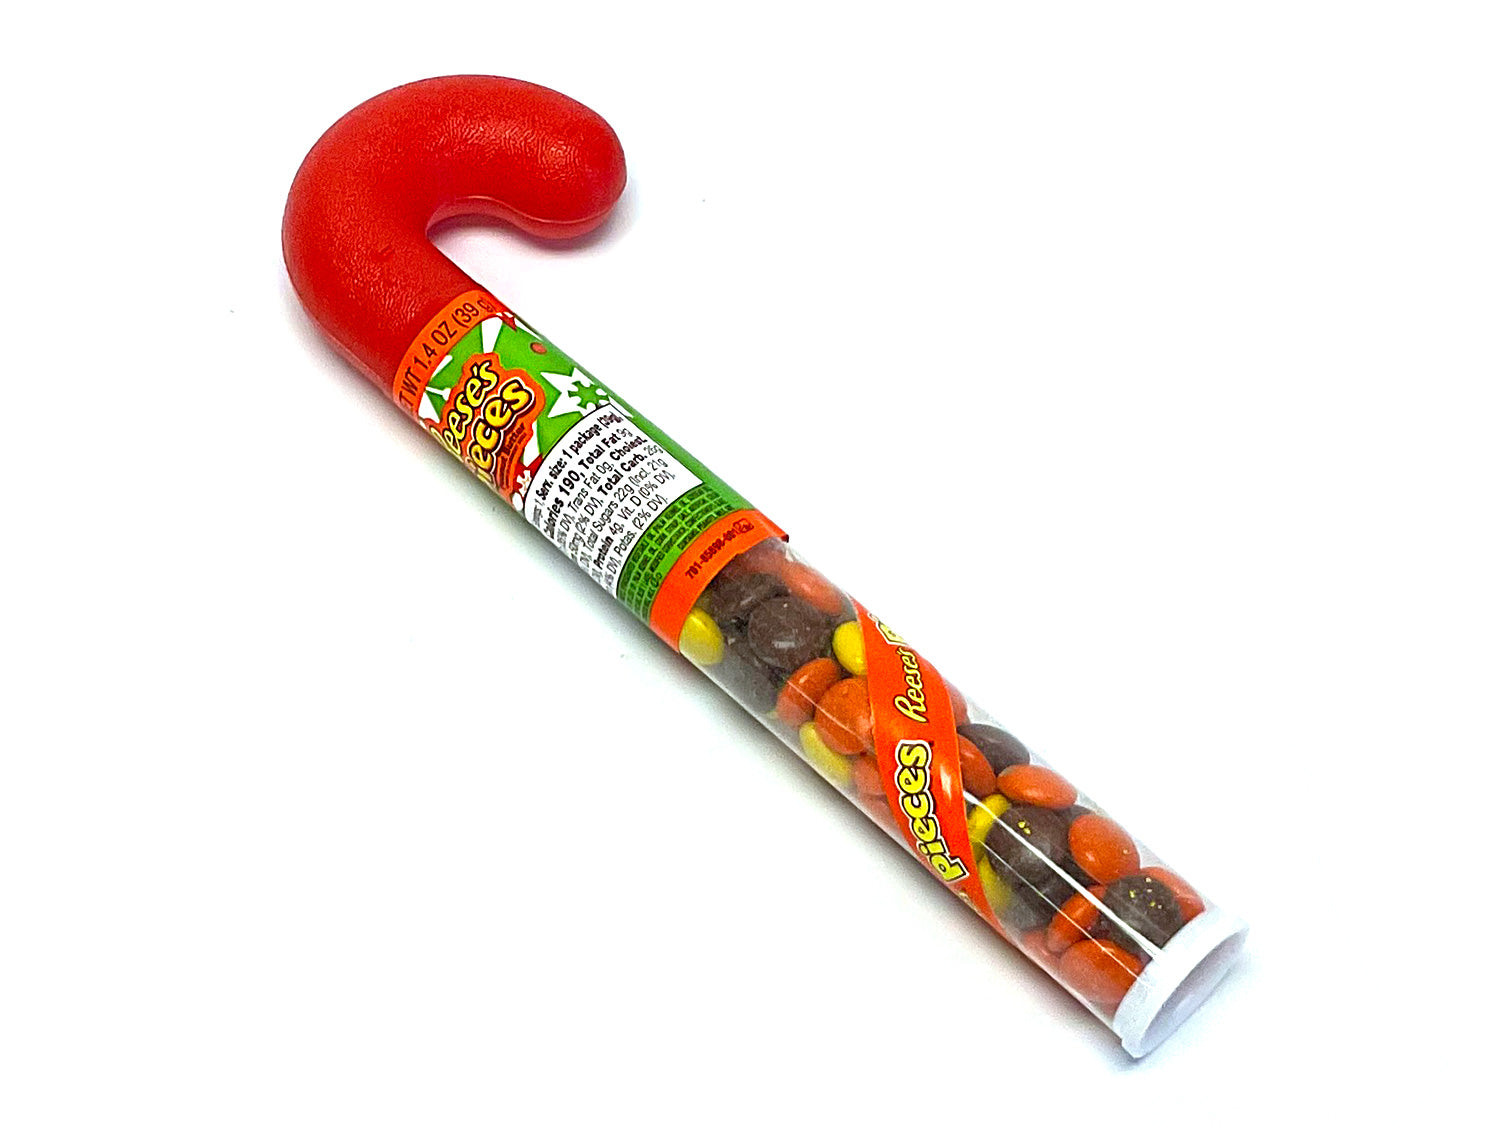 Candy Cane with Reese's Pieces - 1.4 oz - 8.5 inch